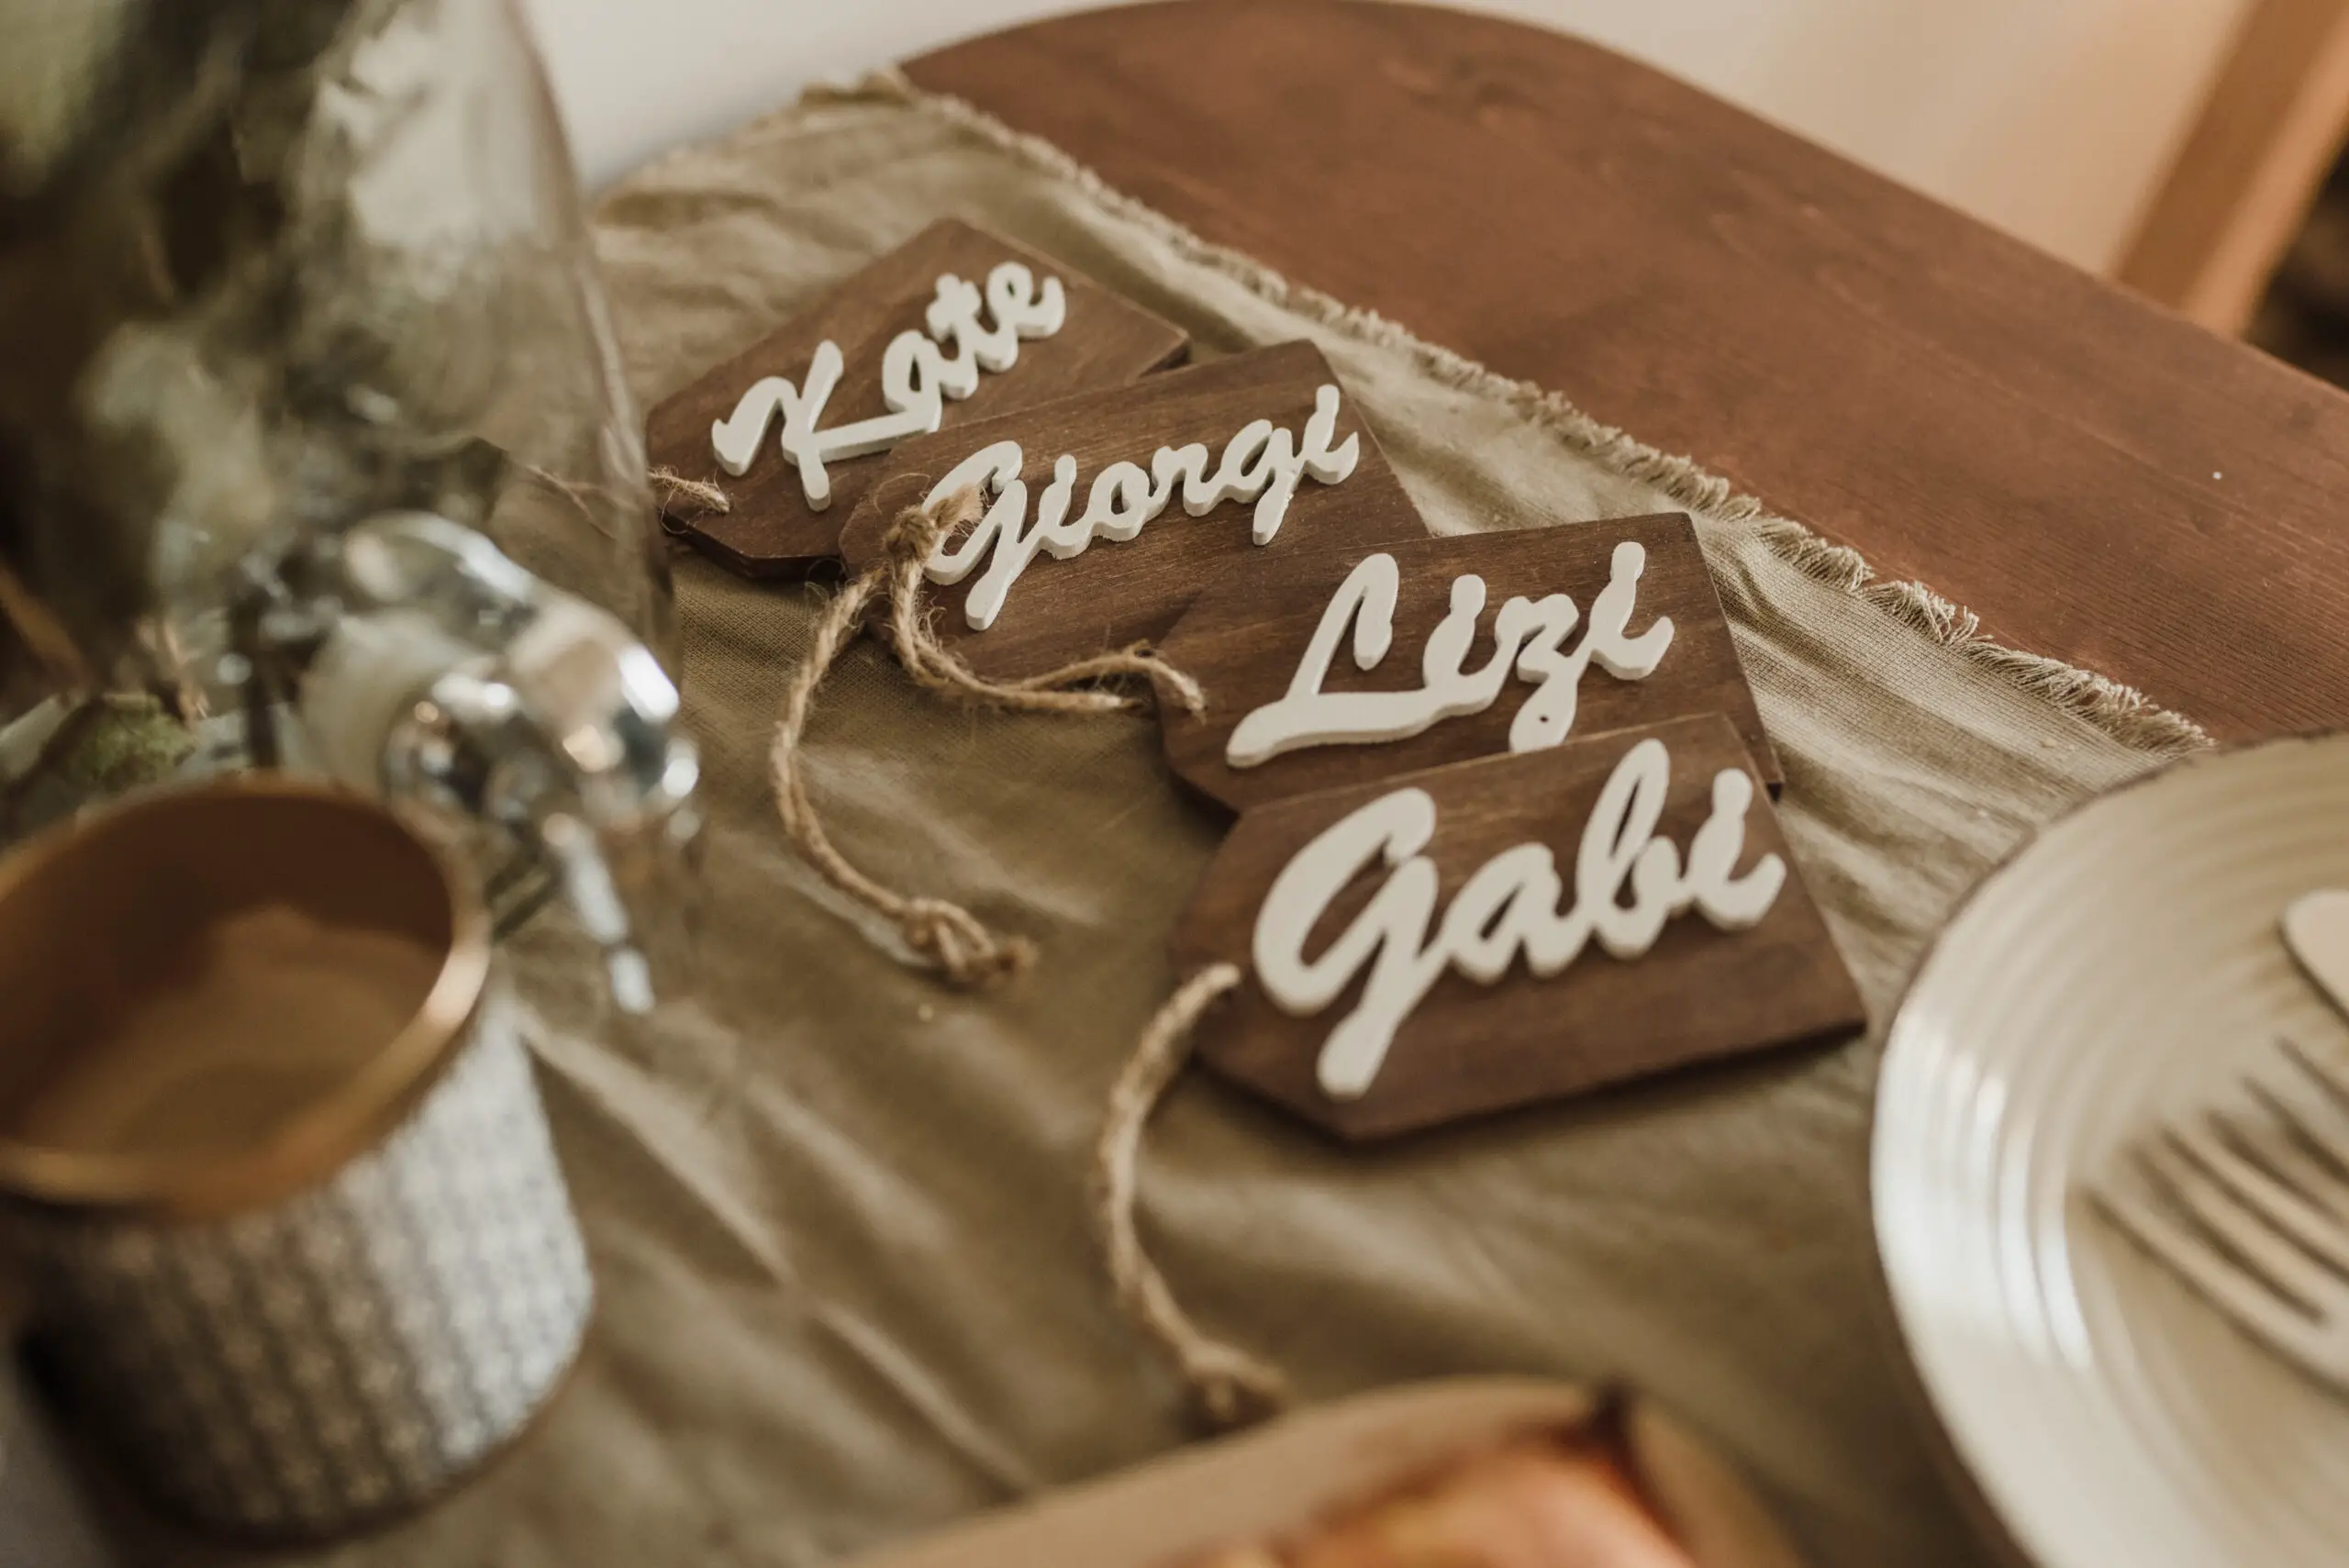 Wooden name tags arranged on table during wedding ceremony